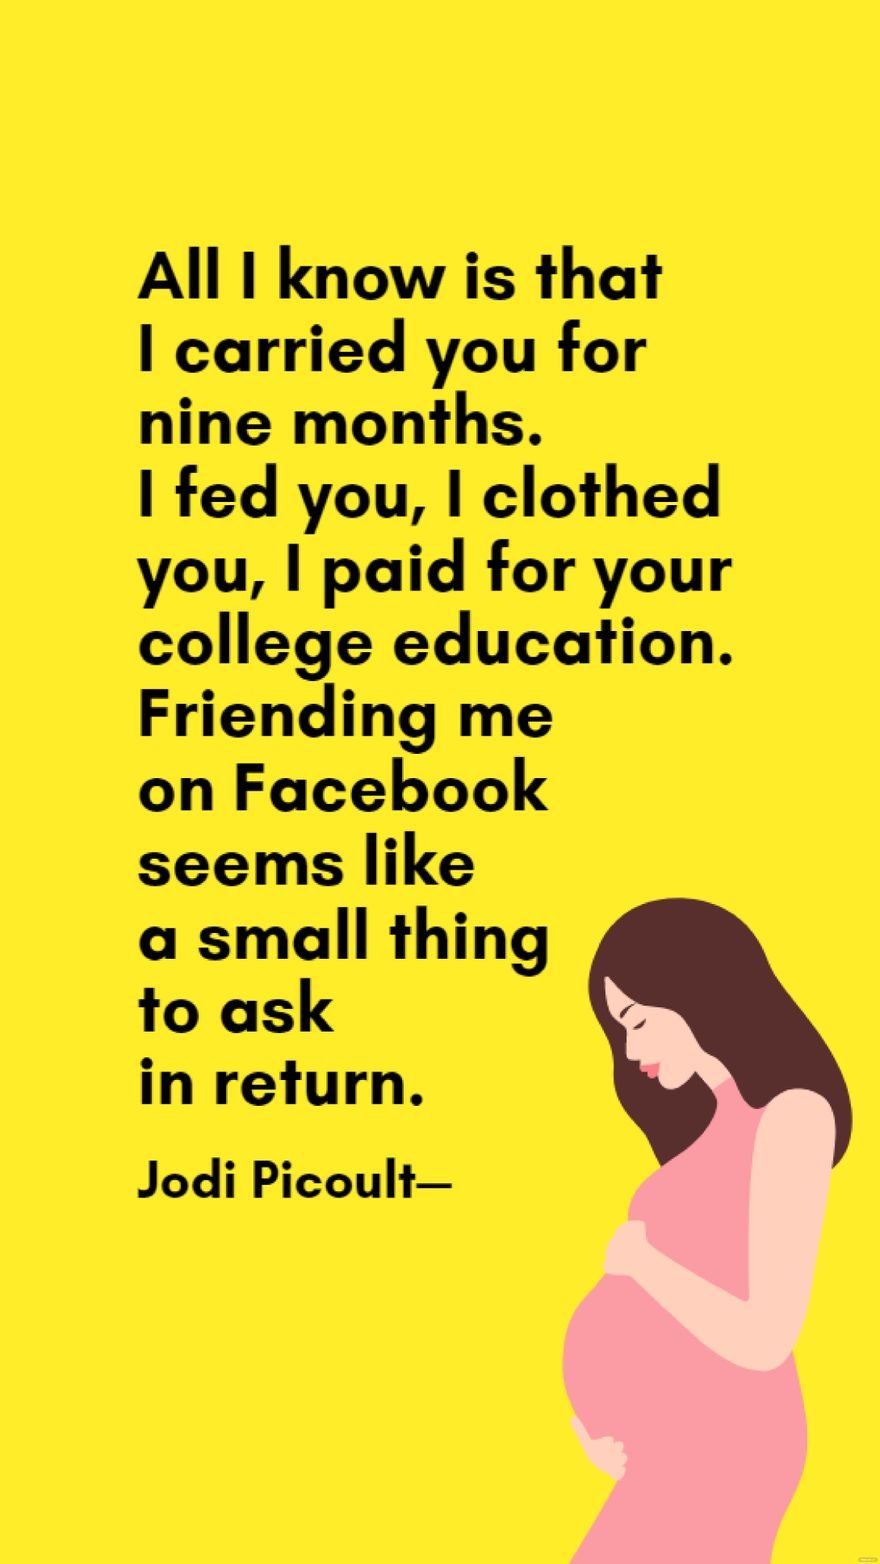 Jodi Picoult - All I know is that I carried you for nine months. I fed you, I clothed you, I paid for your college education. Friending me on Facebook seems like a small thing to ask in return.